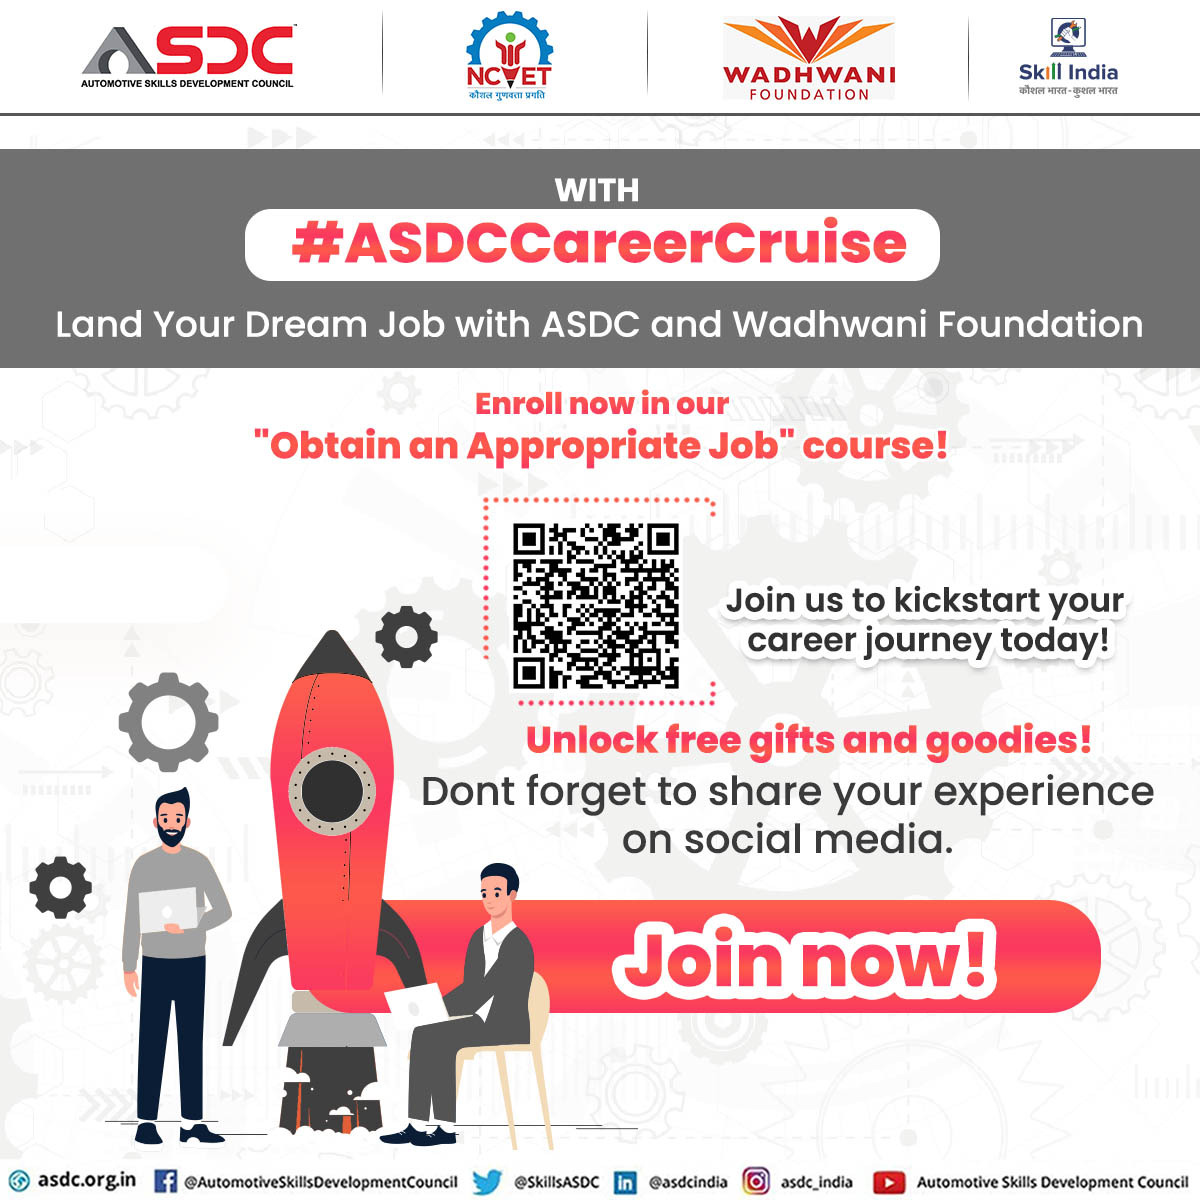 Boost your career with #ASDCCareerCruise and 'Obtain an Appropriate Job' course! 

Enroll now to align your skills and aspirations with the perfect job opportunity. 

#elearning #skillindia #AutomotiveIndustry #campaign #EnhanceYourSkills #EnrollNow